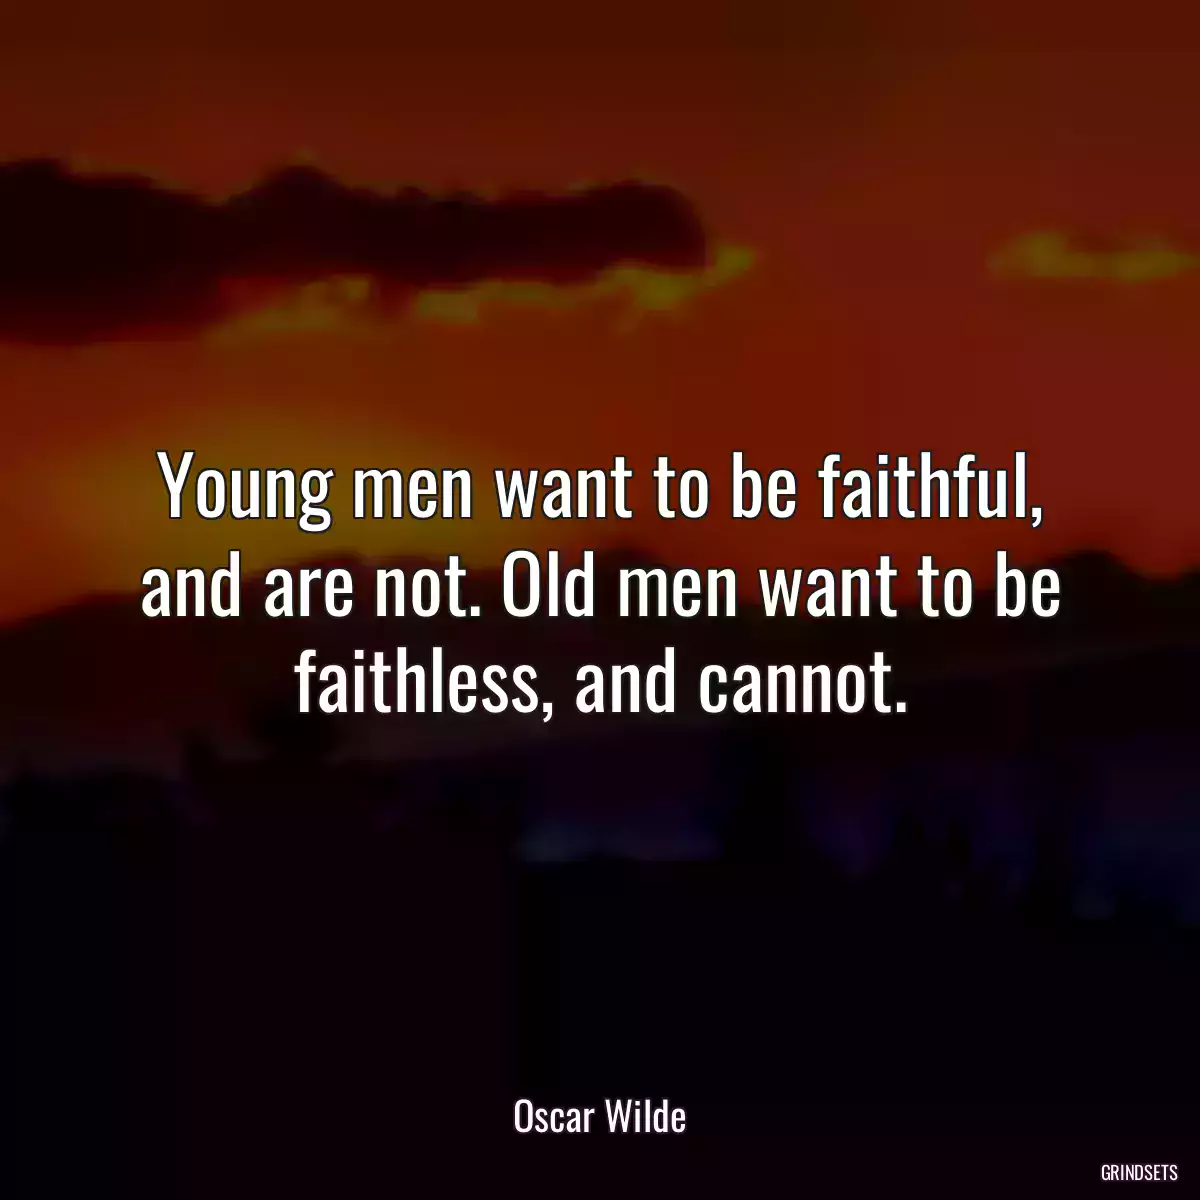 Young men want to be faithful, and are not. Old men want to be faithless, and cannot.